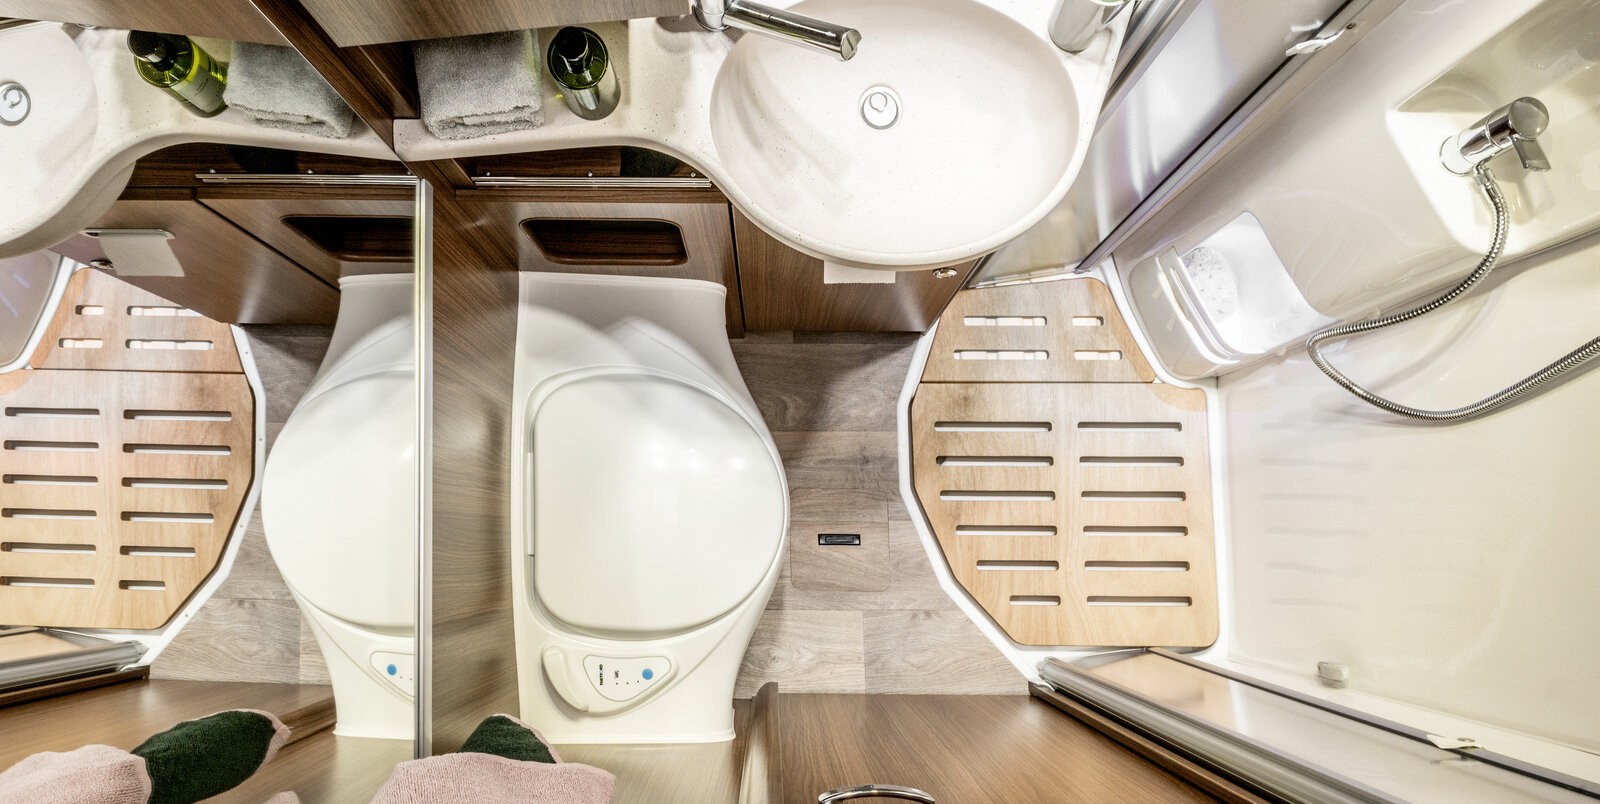 Comfort bathroom in the HYMER ML-T seen from above: shower cubicle with wooden slatted frame, wash basin, mirror, toilet, storage cupboards